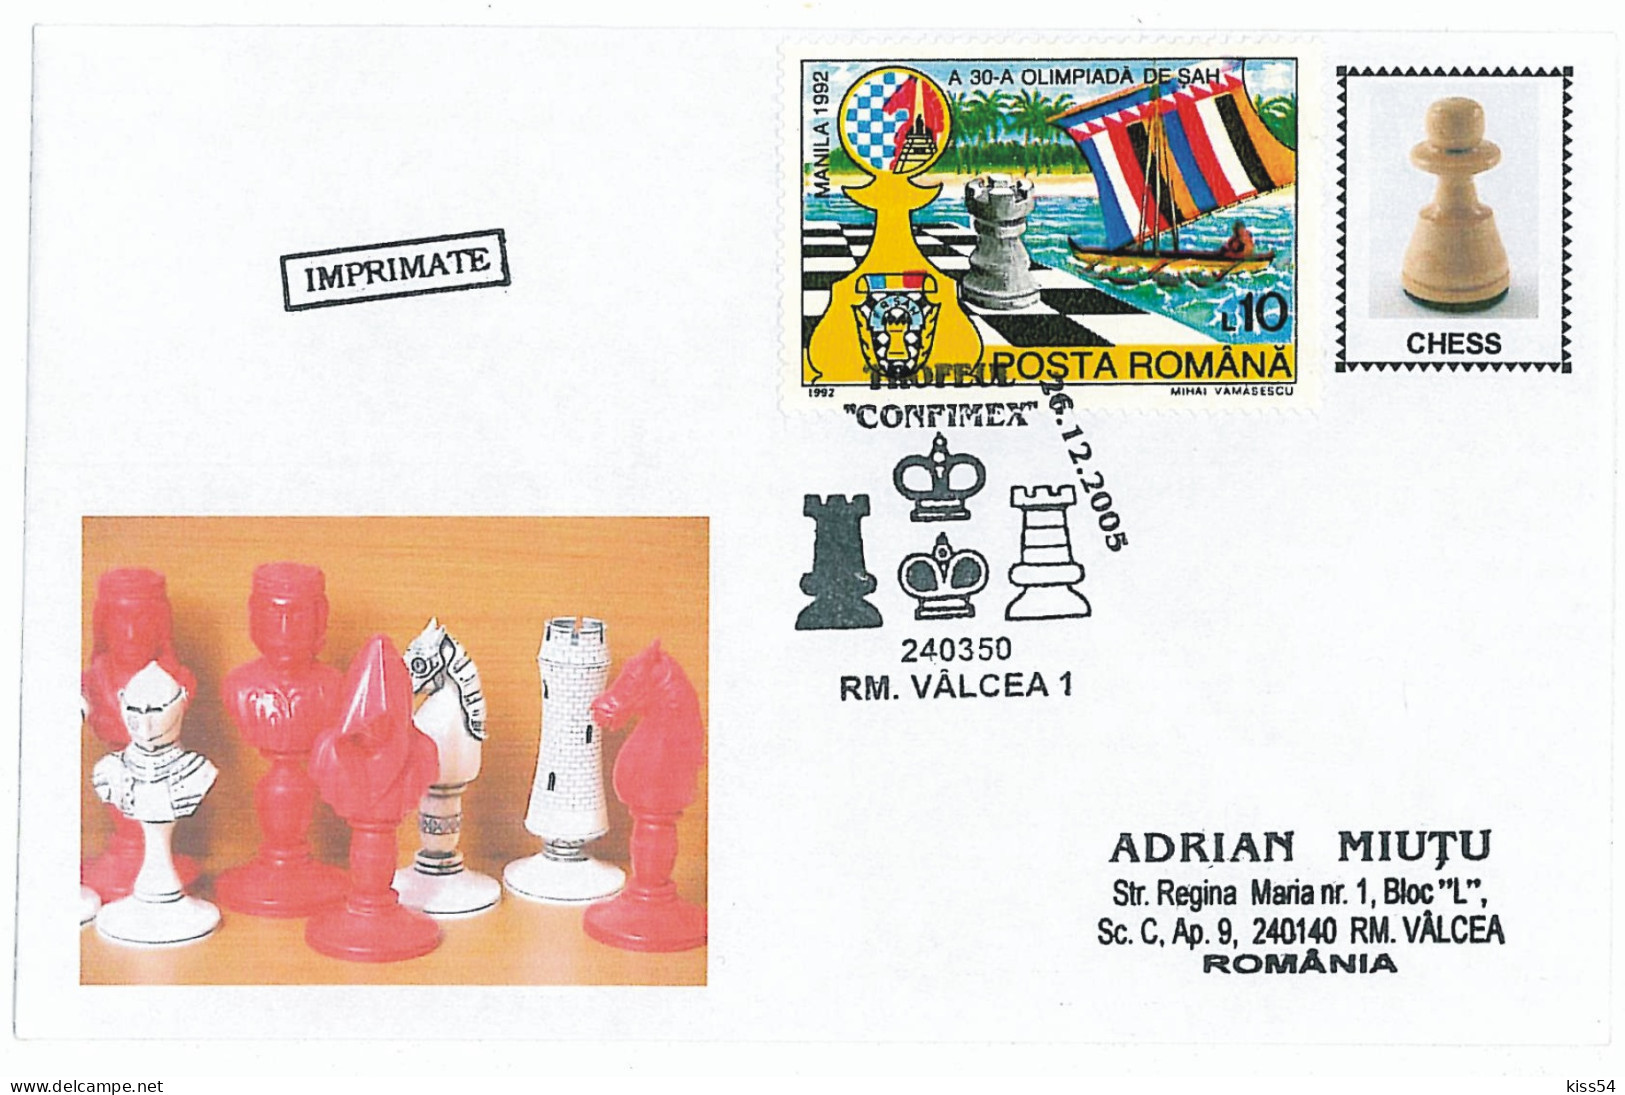 COV 82 - 219 CHESS, Romania - Cover - Used - 2005 - Covers & Documents